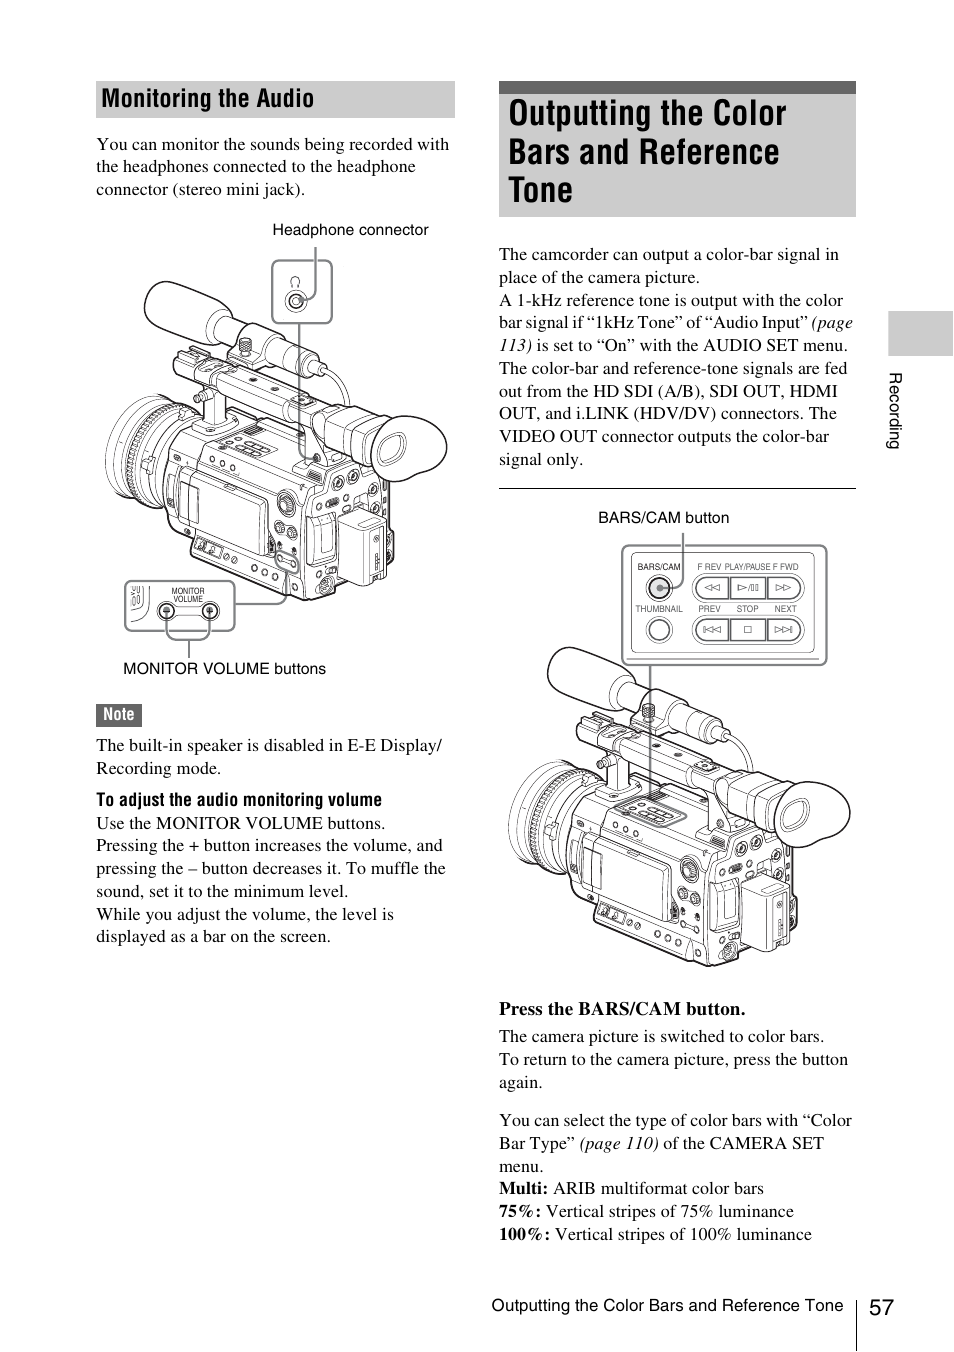 Monitoring the audio, Outputting the color bars and reference tone, Press the bars/cam button | Sony PMW-F3K User Manual | Page 57 / 164